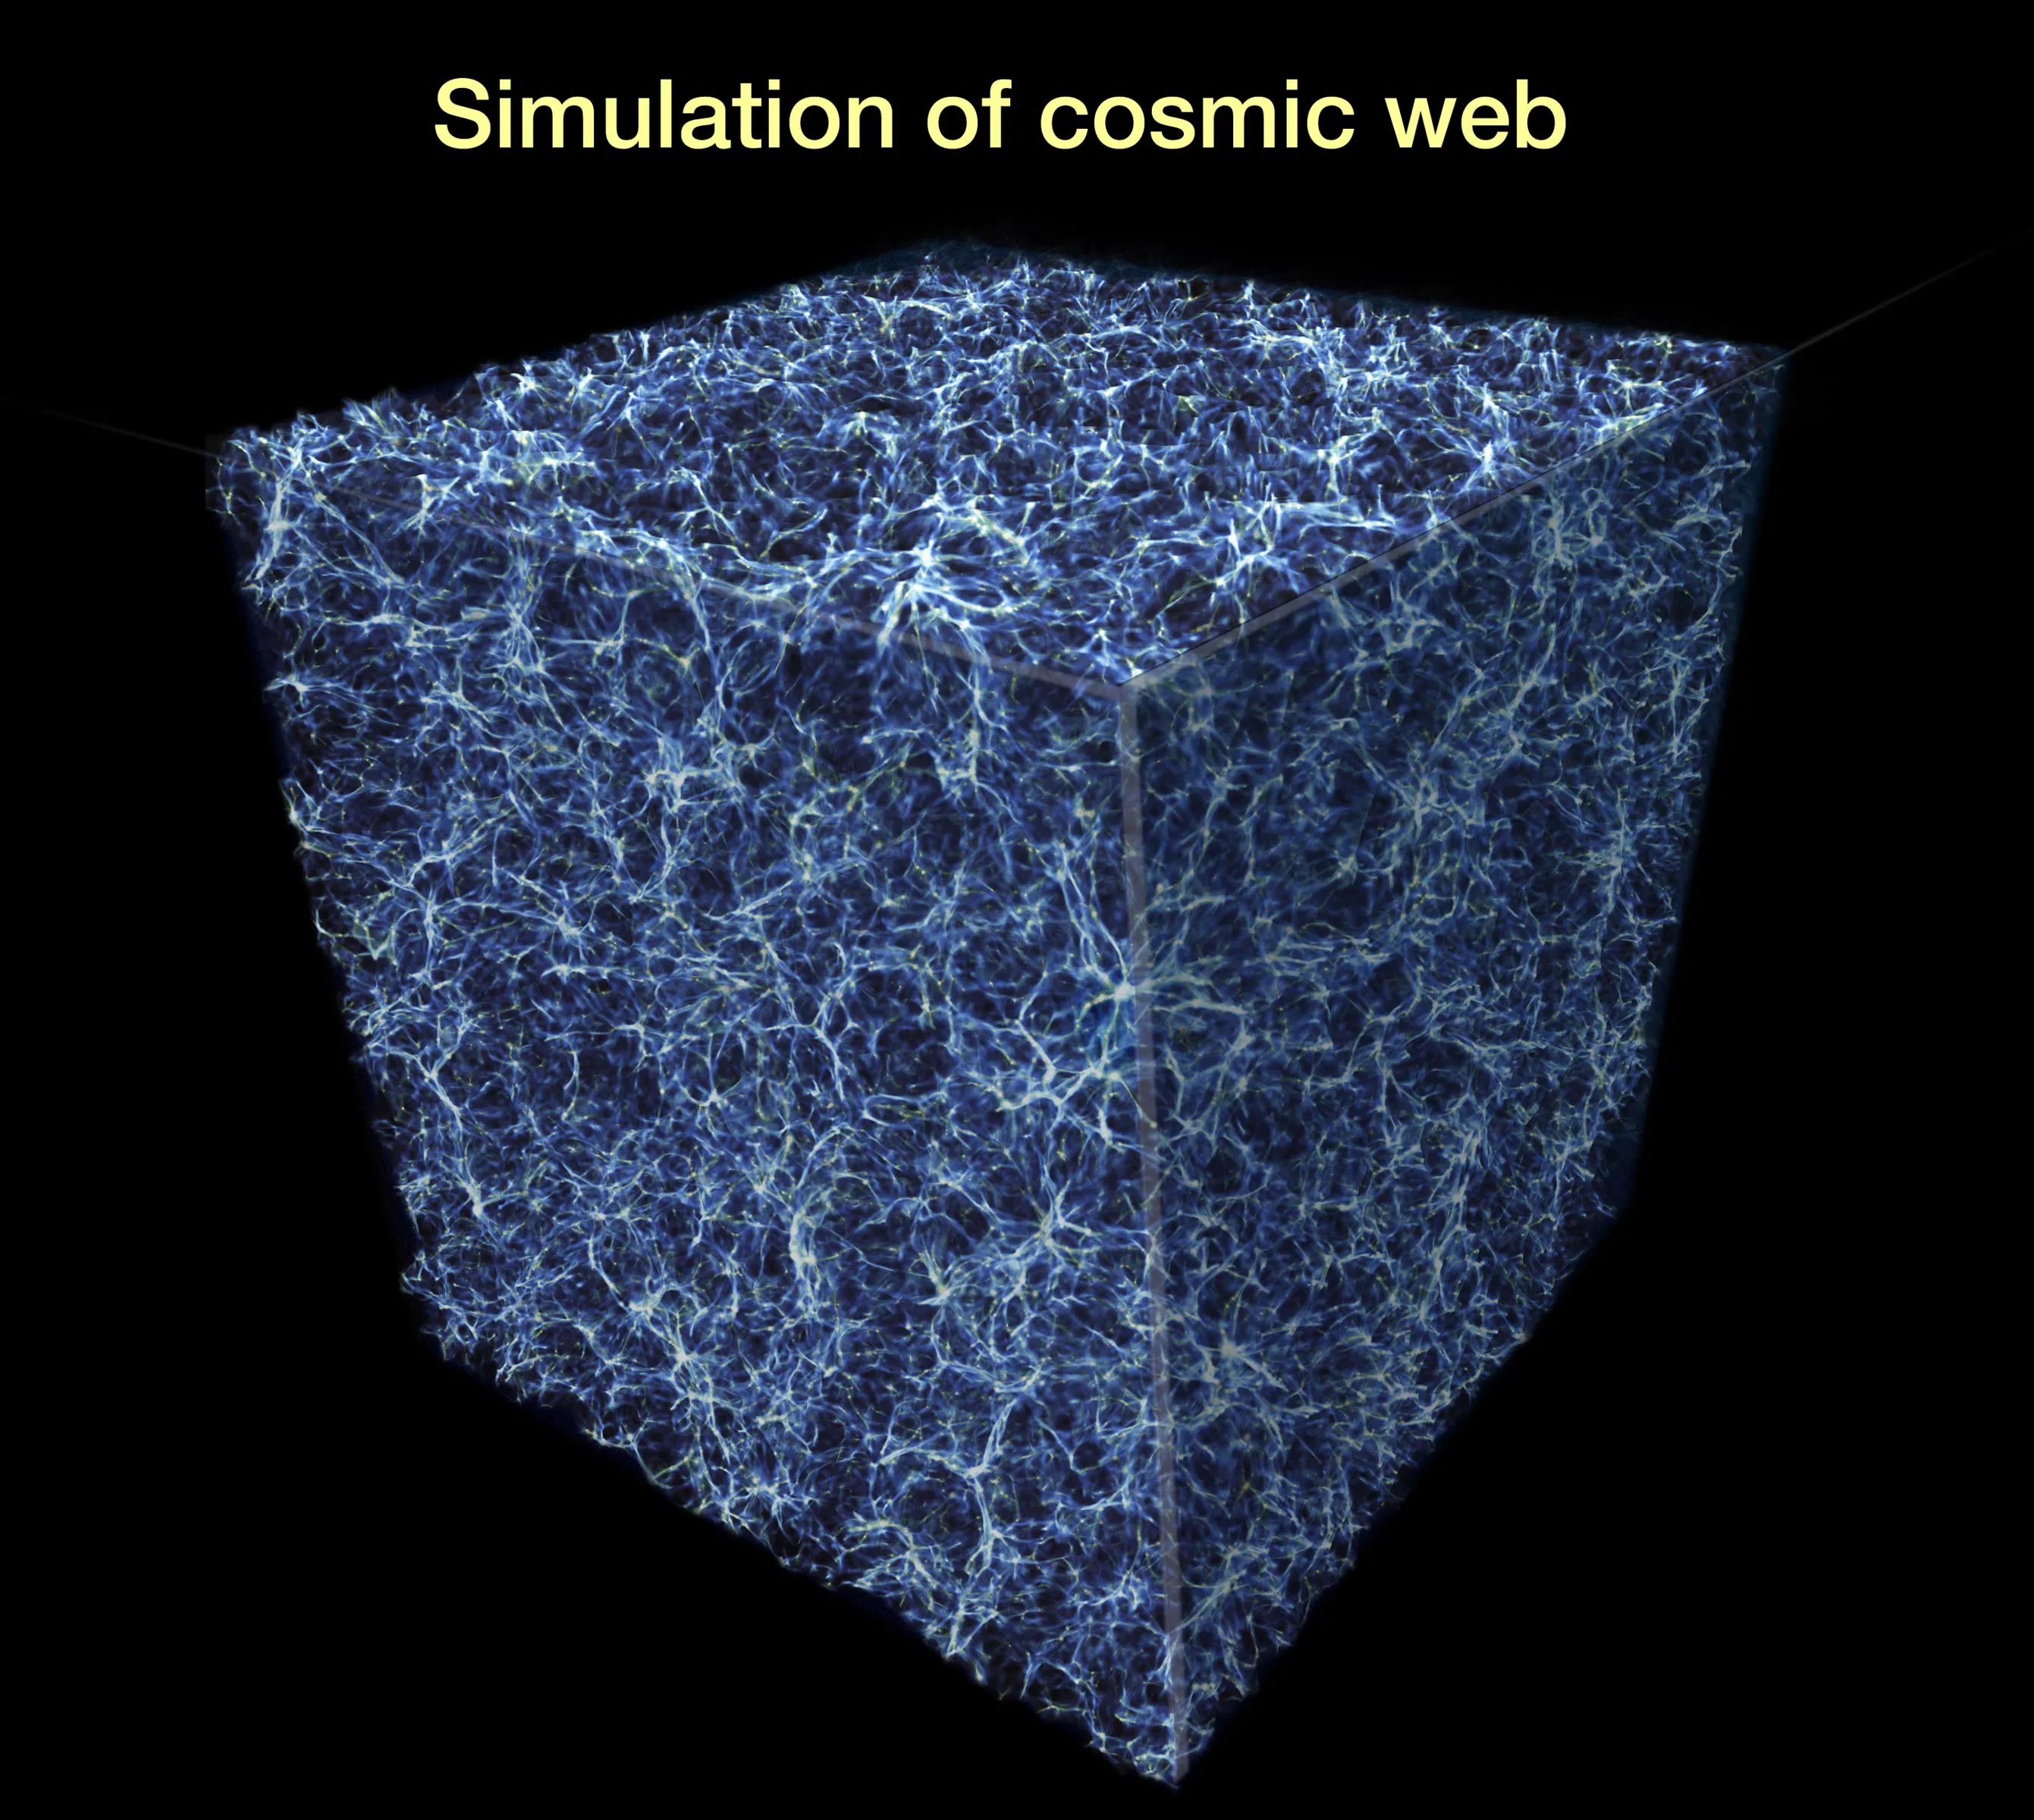 Graphical representation of the cosmic web